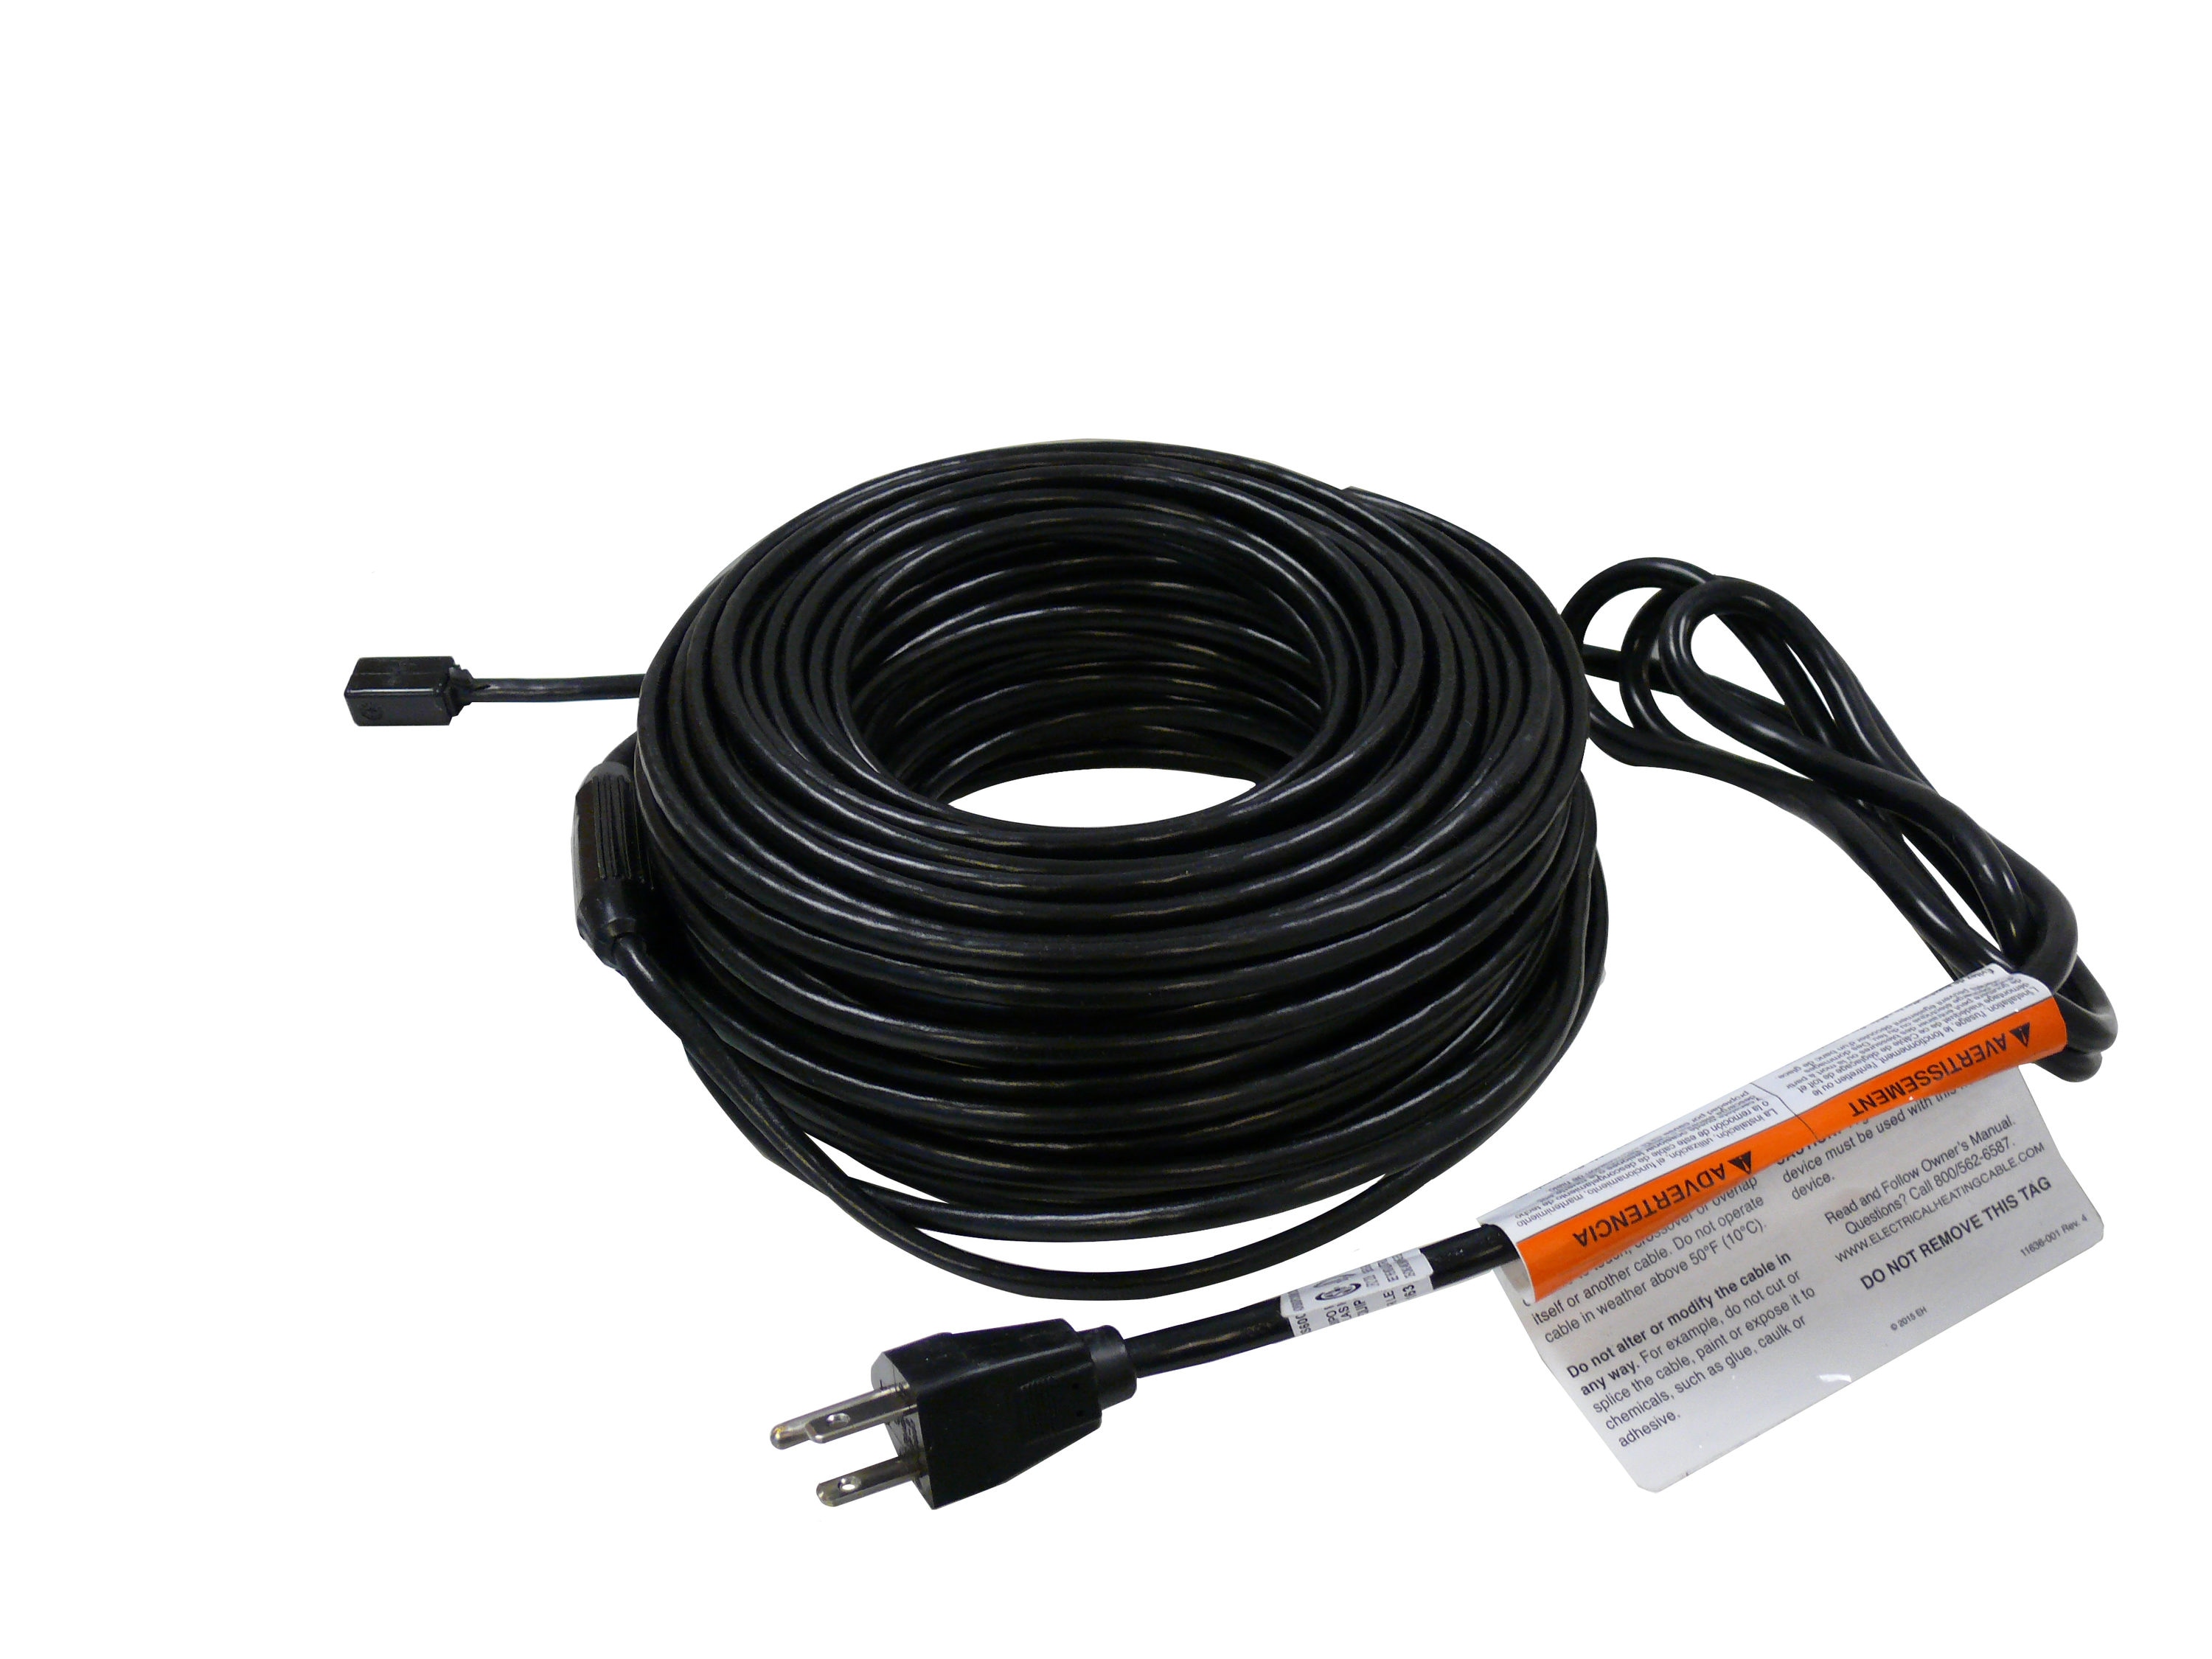 Easy Heat ADKS 160 ft. L De-Icing Cable For Roof and Gutter